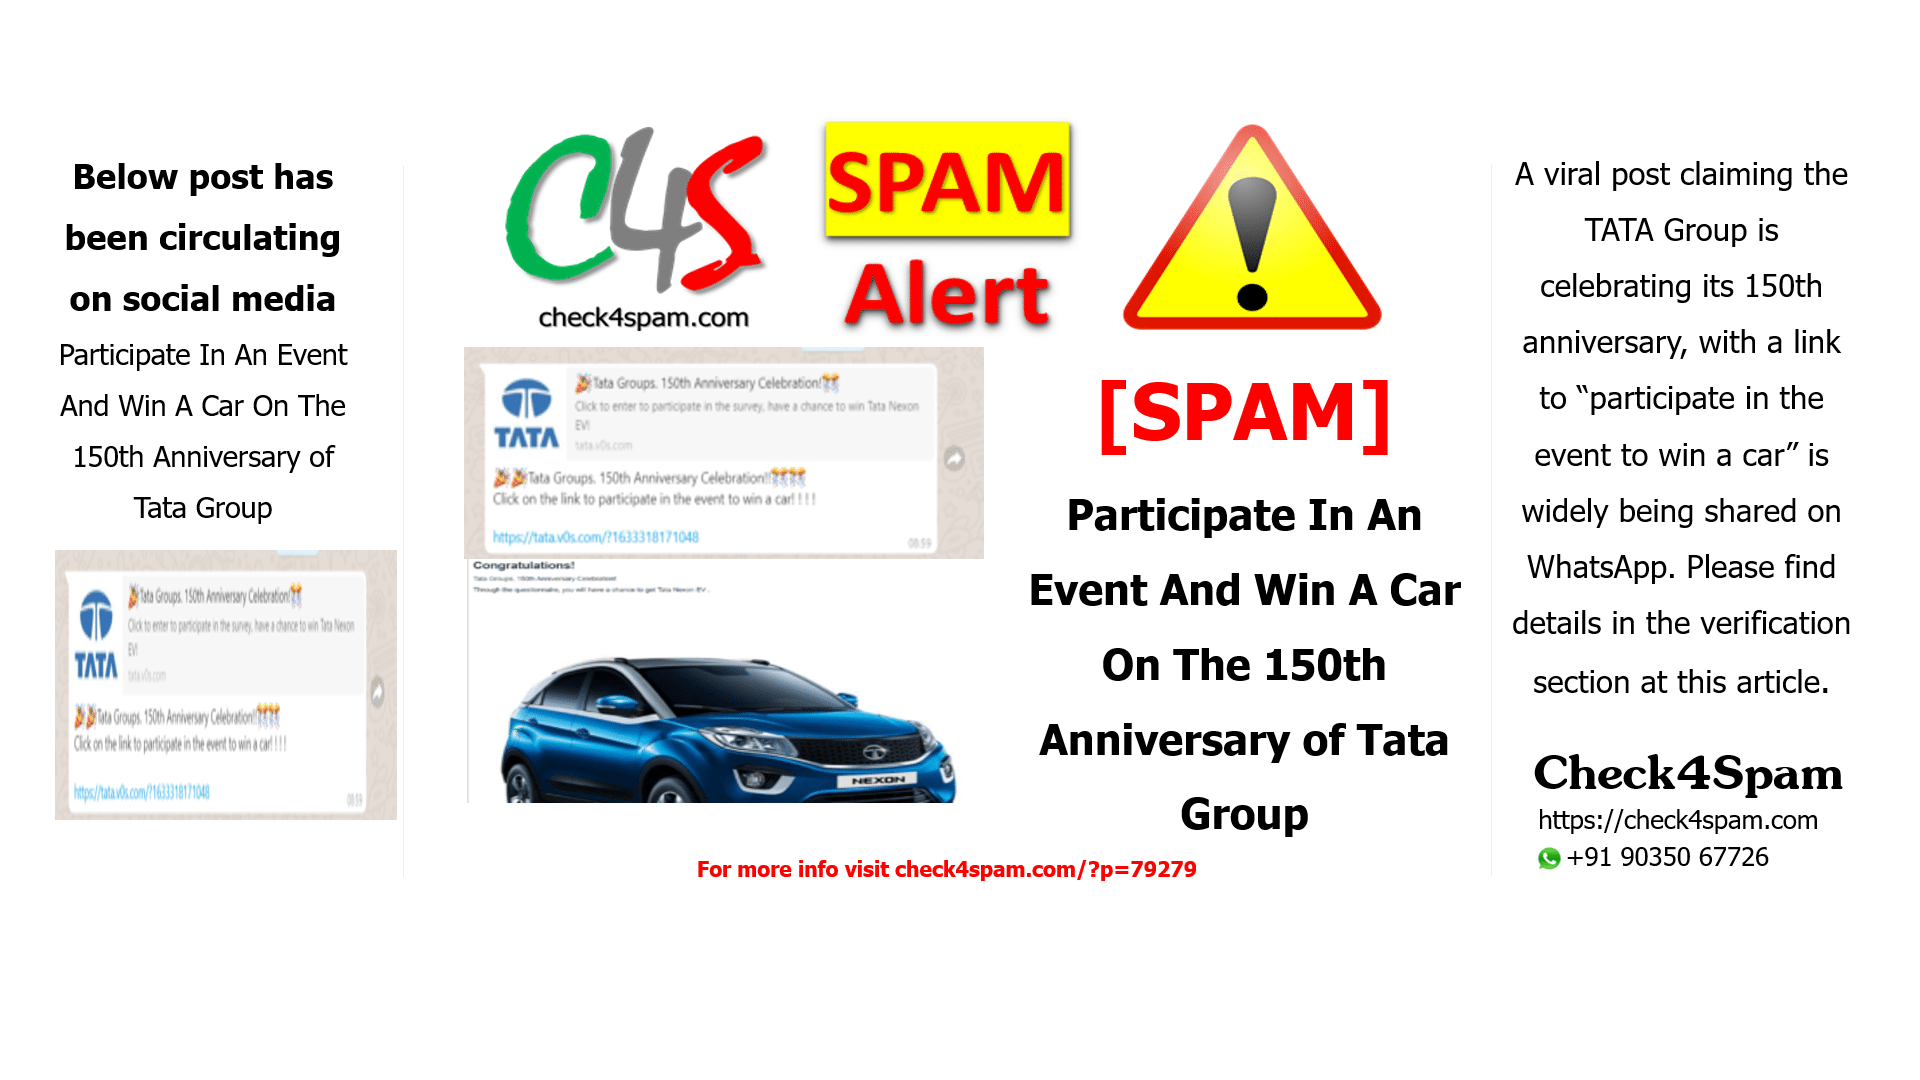 Participate In An Event And Win A Car On The 150th Anniversary of Tata Group